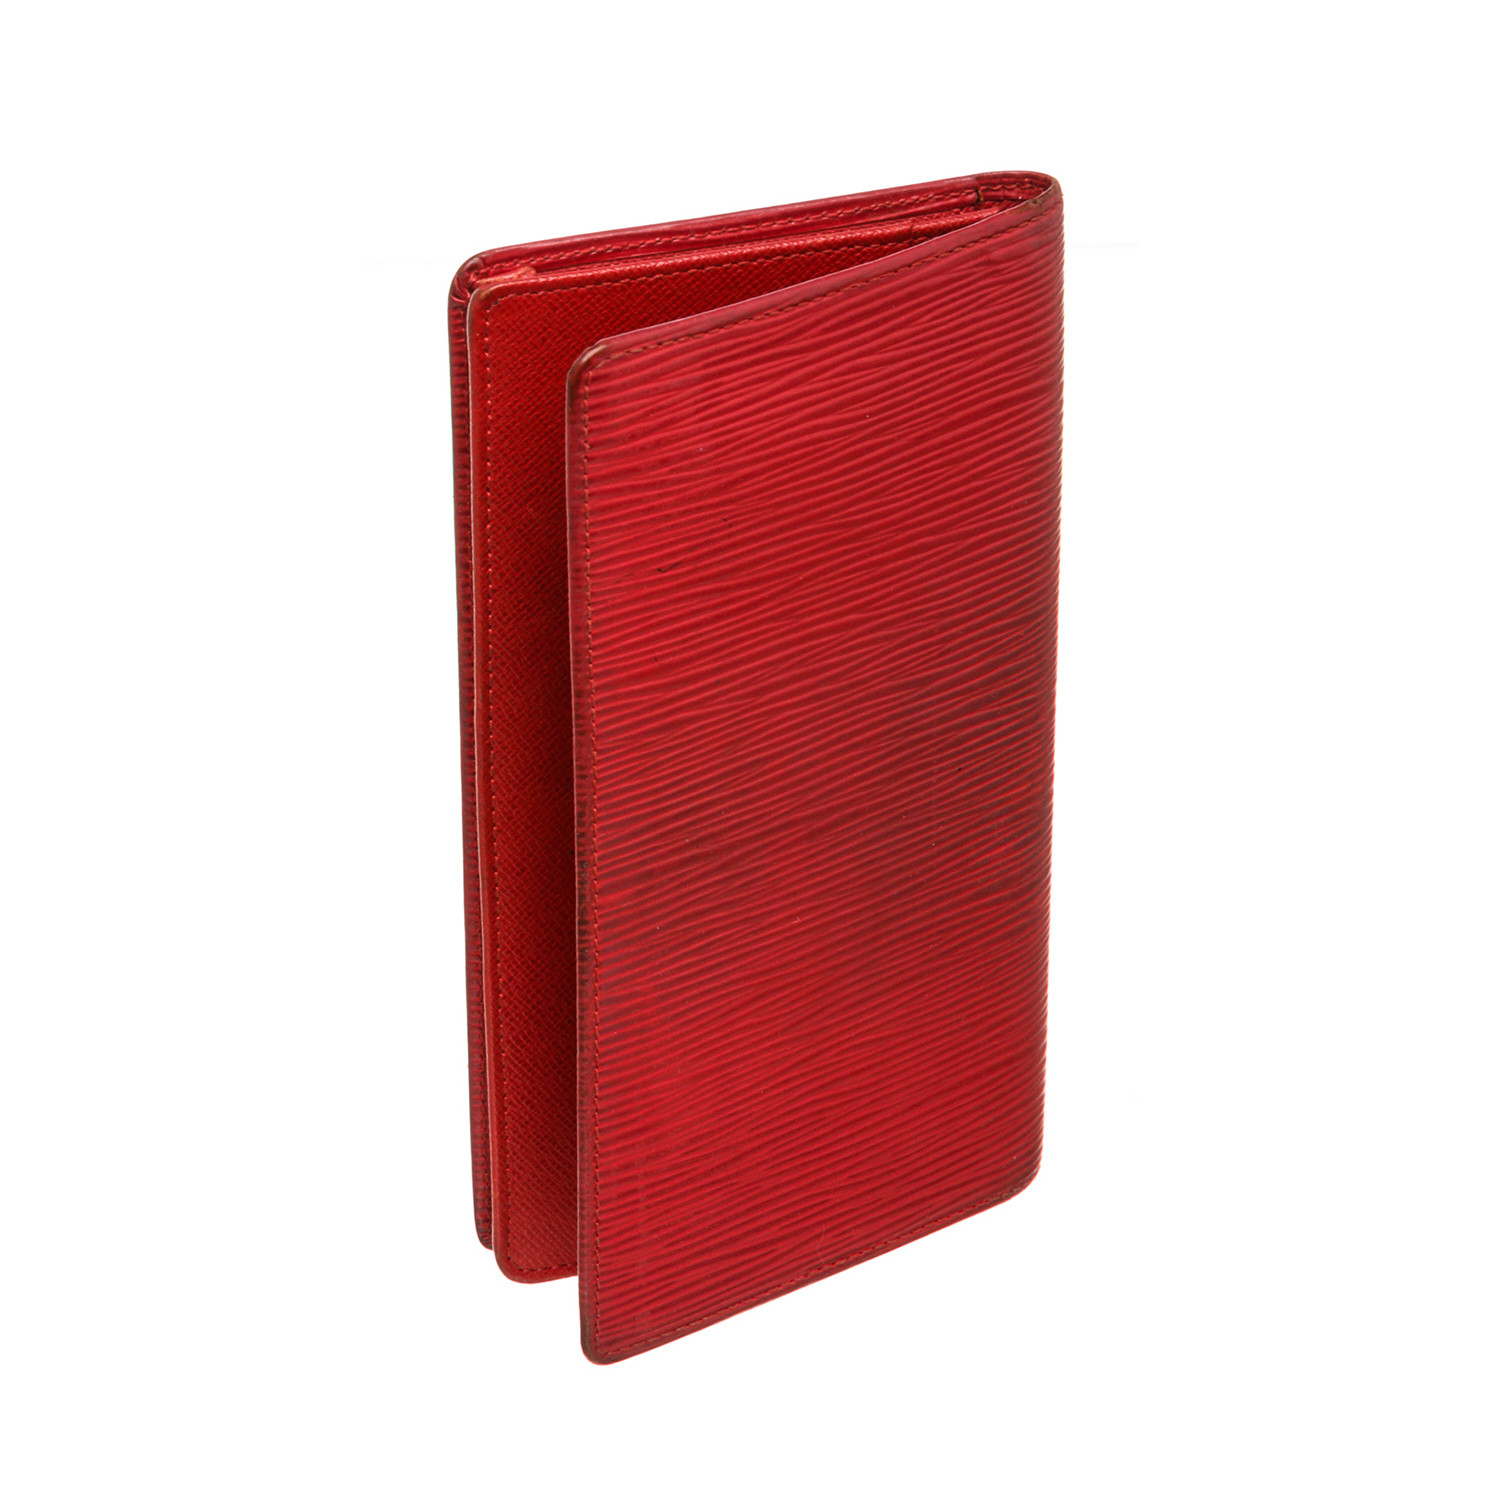 Louis Vuitton // Epi Leather Checkbook Wallet // Red // Pre-Owned - Pre-Owned Designer Bags ...